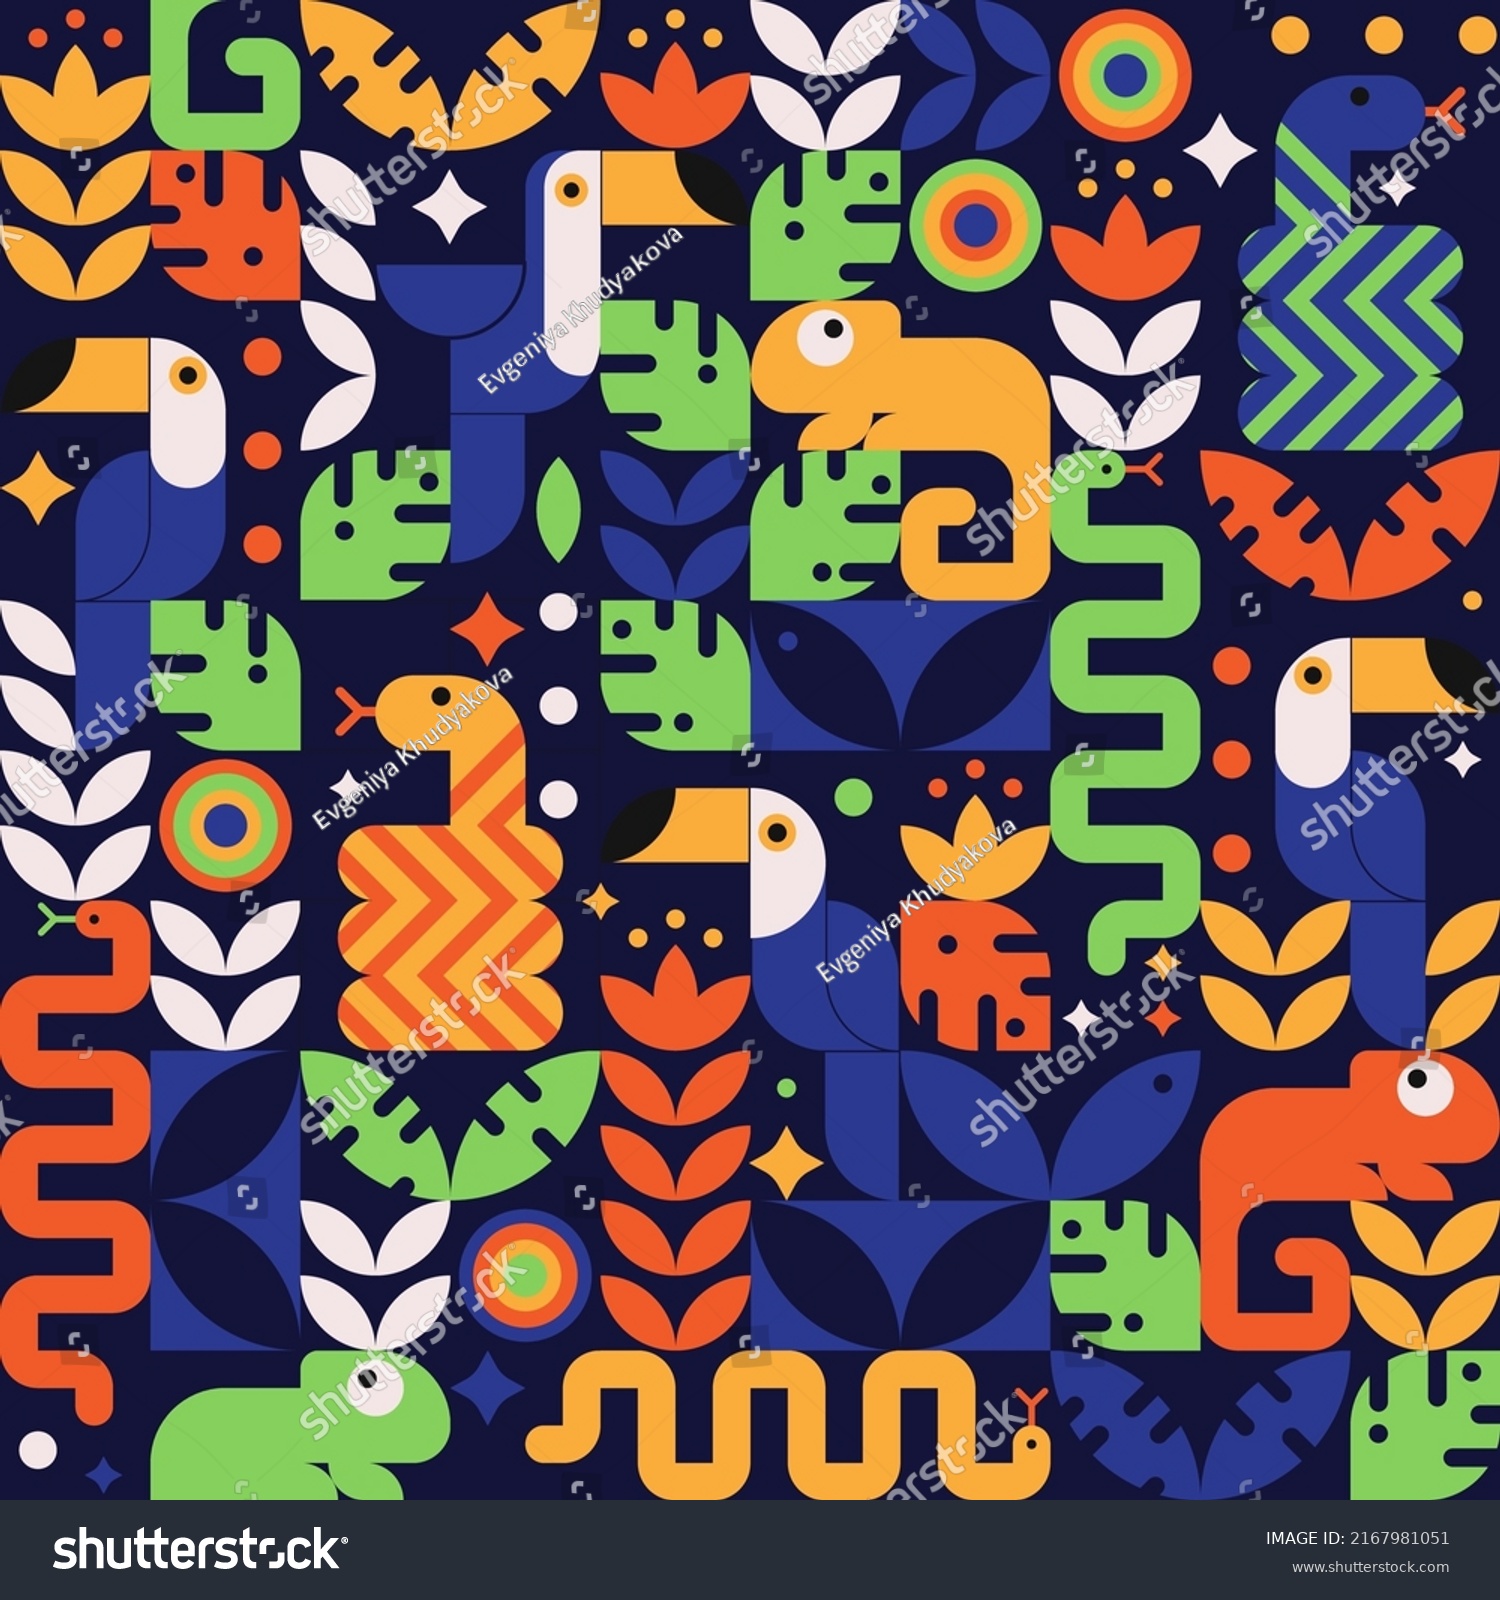 SVG of Cute colorful geometric plants and animals seamless pattern. Funny jungle flora and fauna print. Bright and Joyful vector print with snakes, chameleon, toucan bird, leaves and flowers from rainforest svg